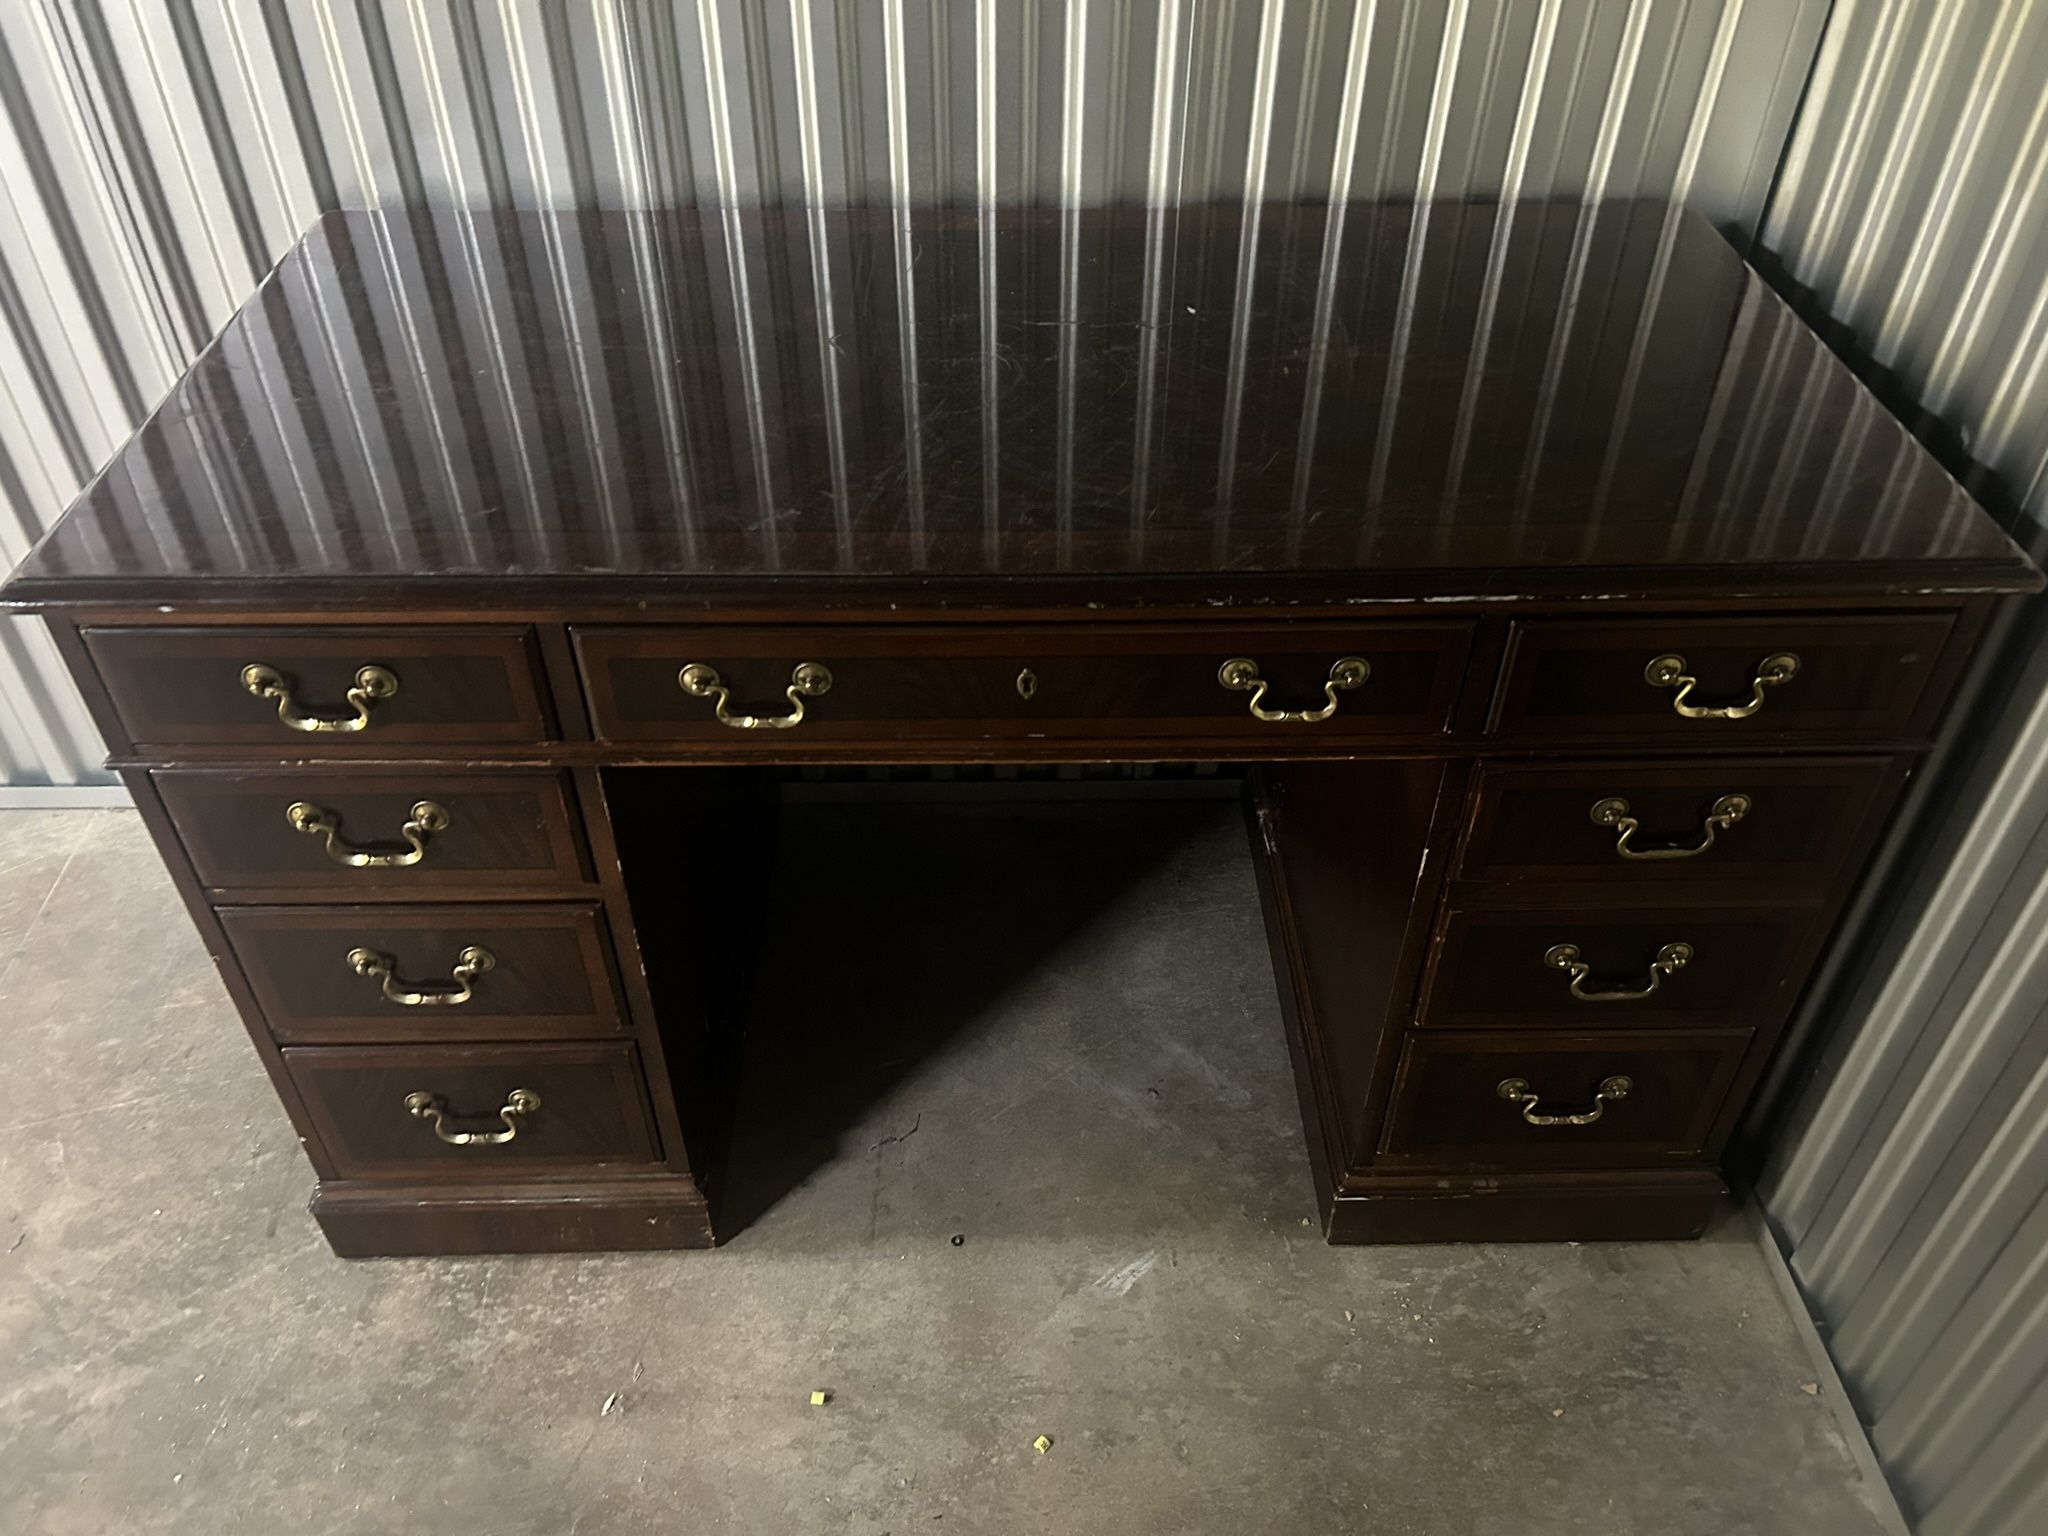 American Hand Crafted Desk - Used/Worn